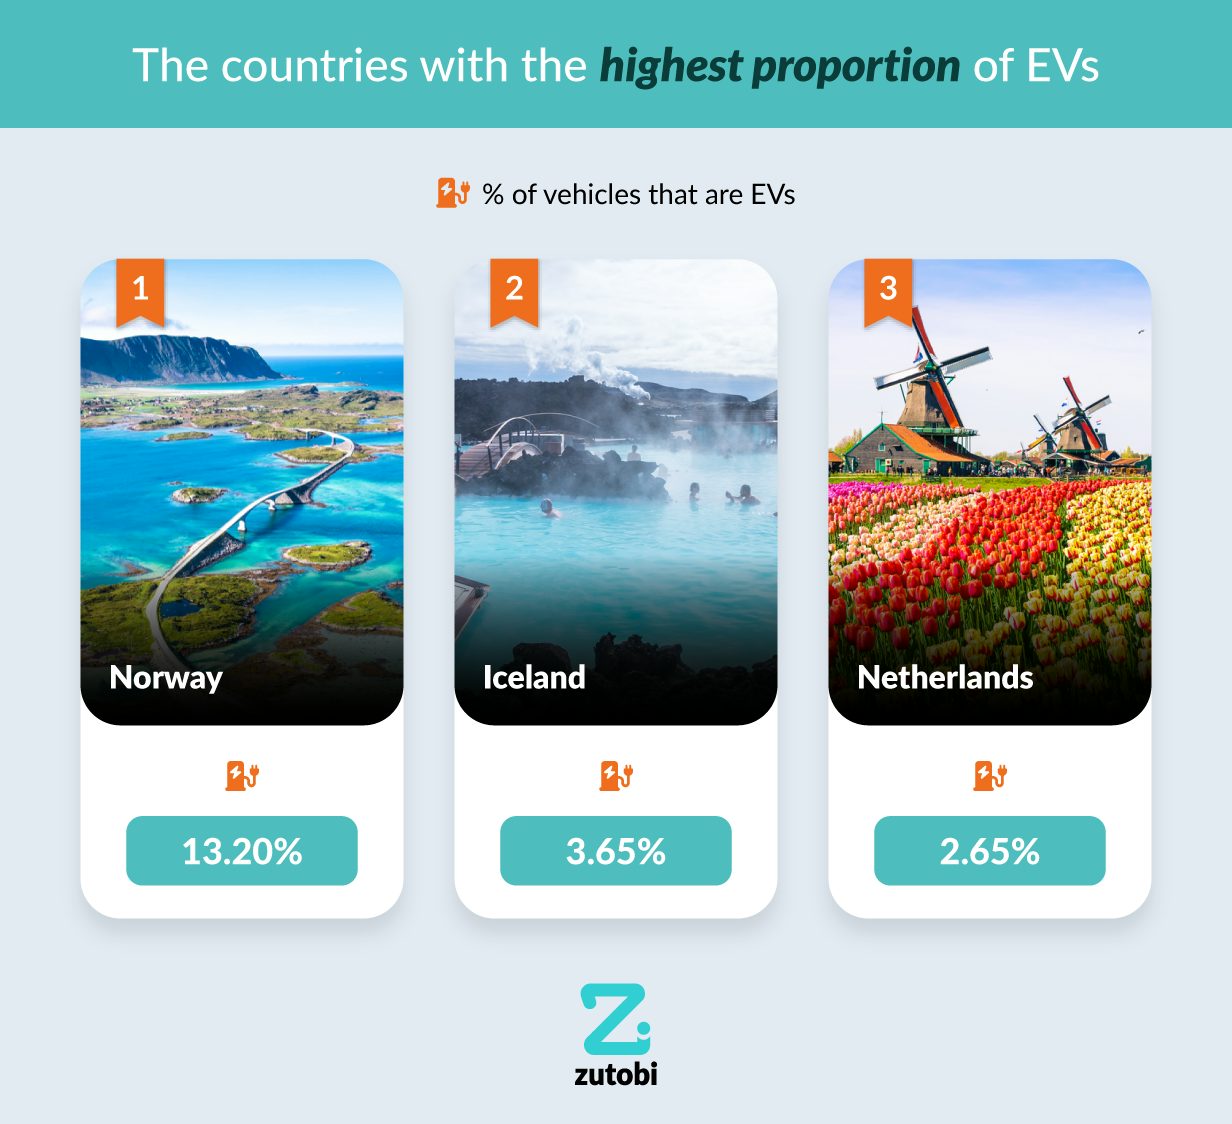 The countries with the highest proportion of EVs